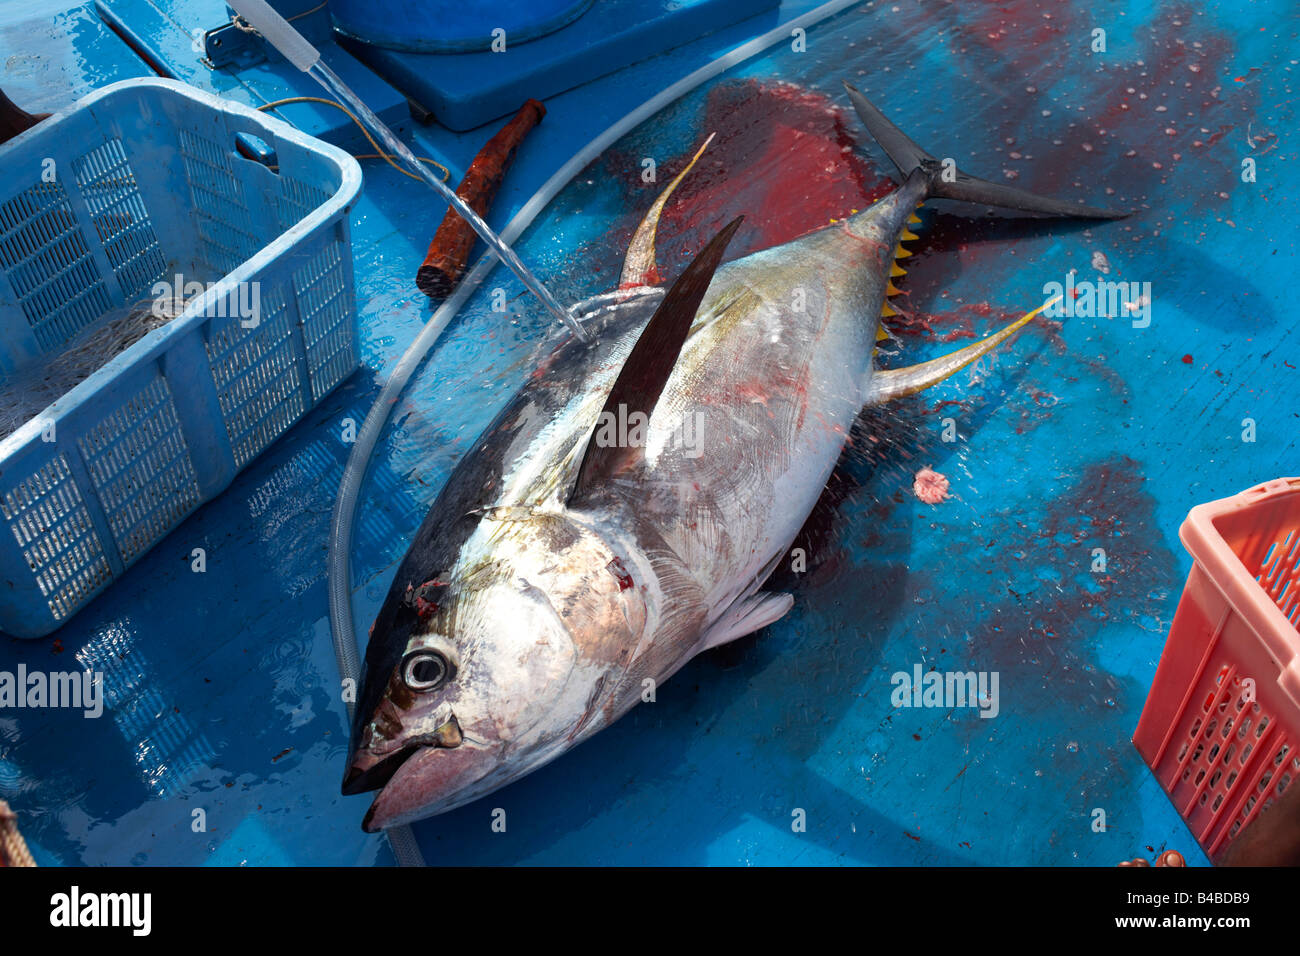 Hosing down a freshly-killed line caught yellowfin tuna fish on the blue deck of a traditional dhoni fishing boat, Maldives Stock Photo